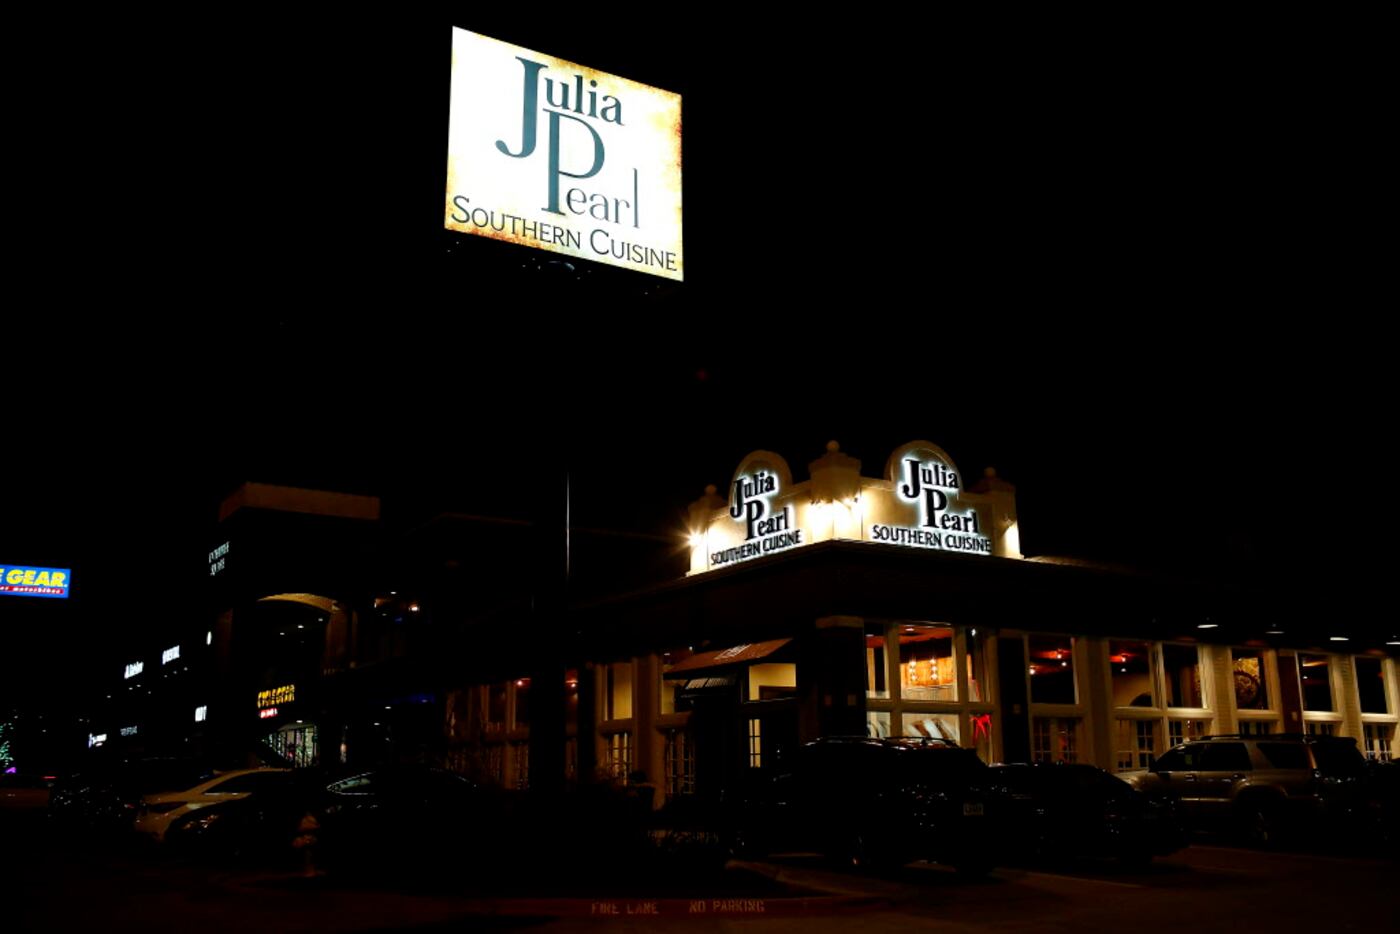 The outside of Julia Pearl Southern Cuisine, a new restaurant in Plano, Texas, during a...